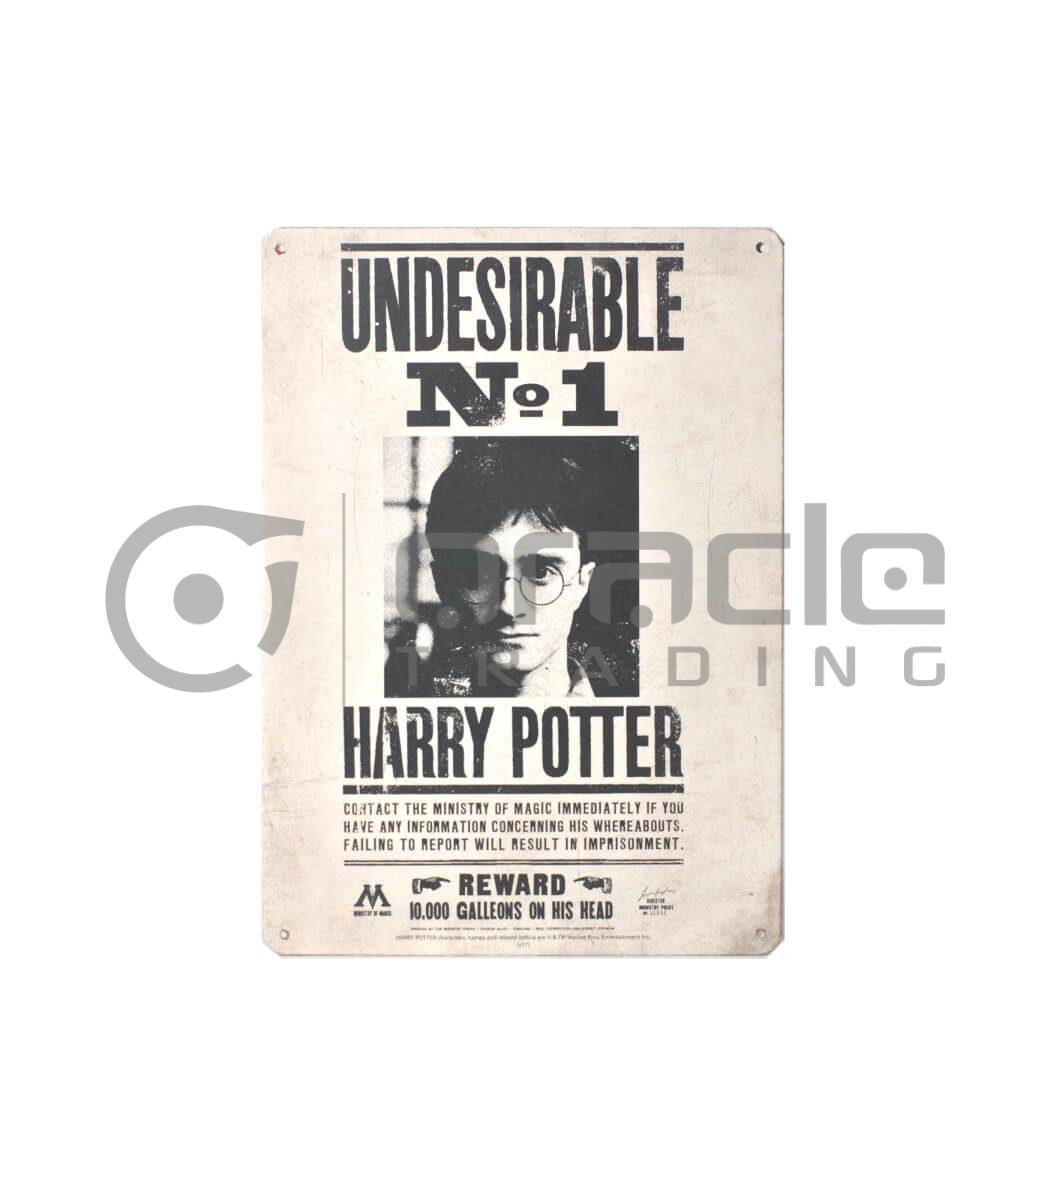 Harry Potter Street Sign - Undesirable #1